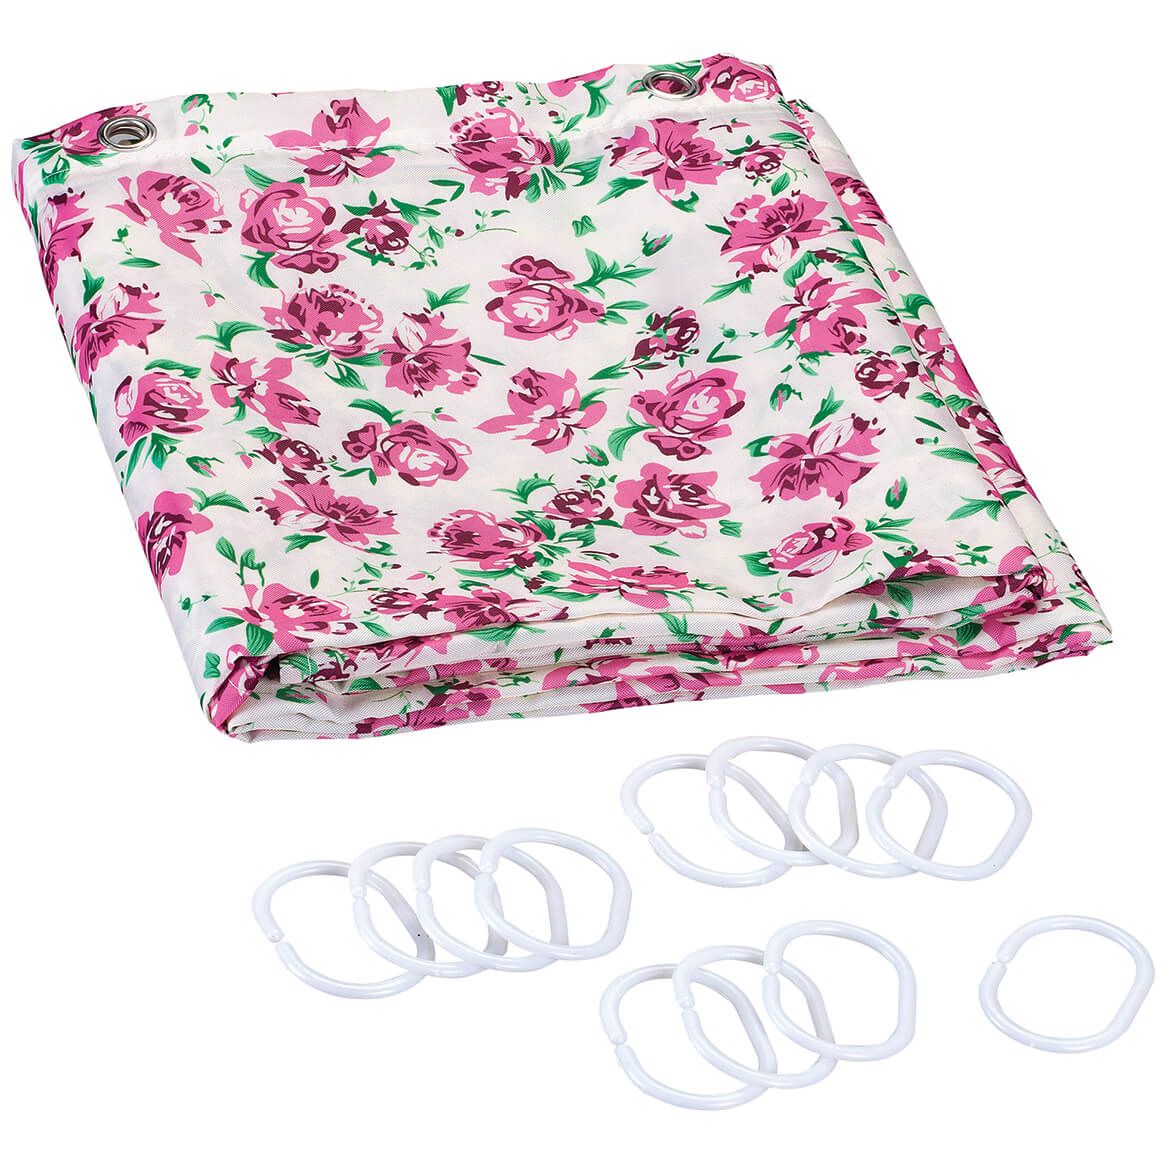 Roses Shower Curtain with Set of 12 Hooks + '-' + 373202